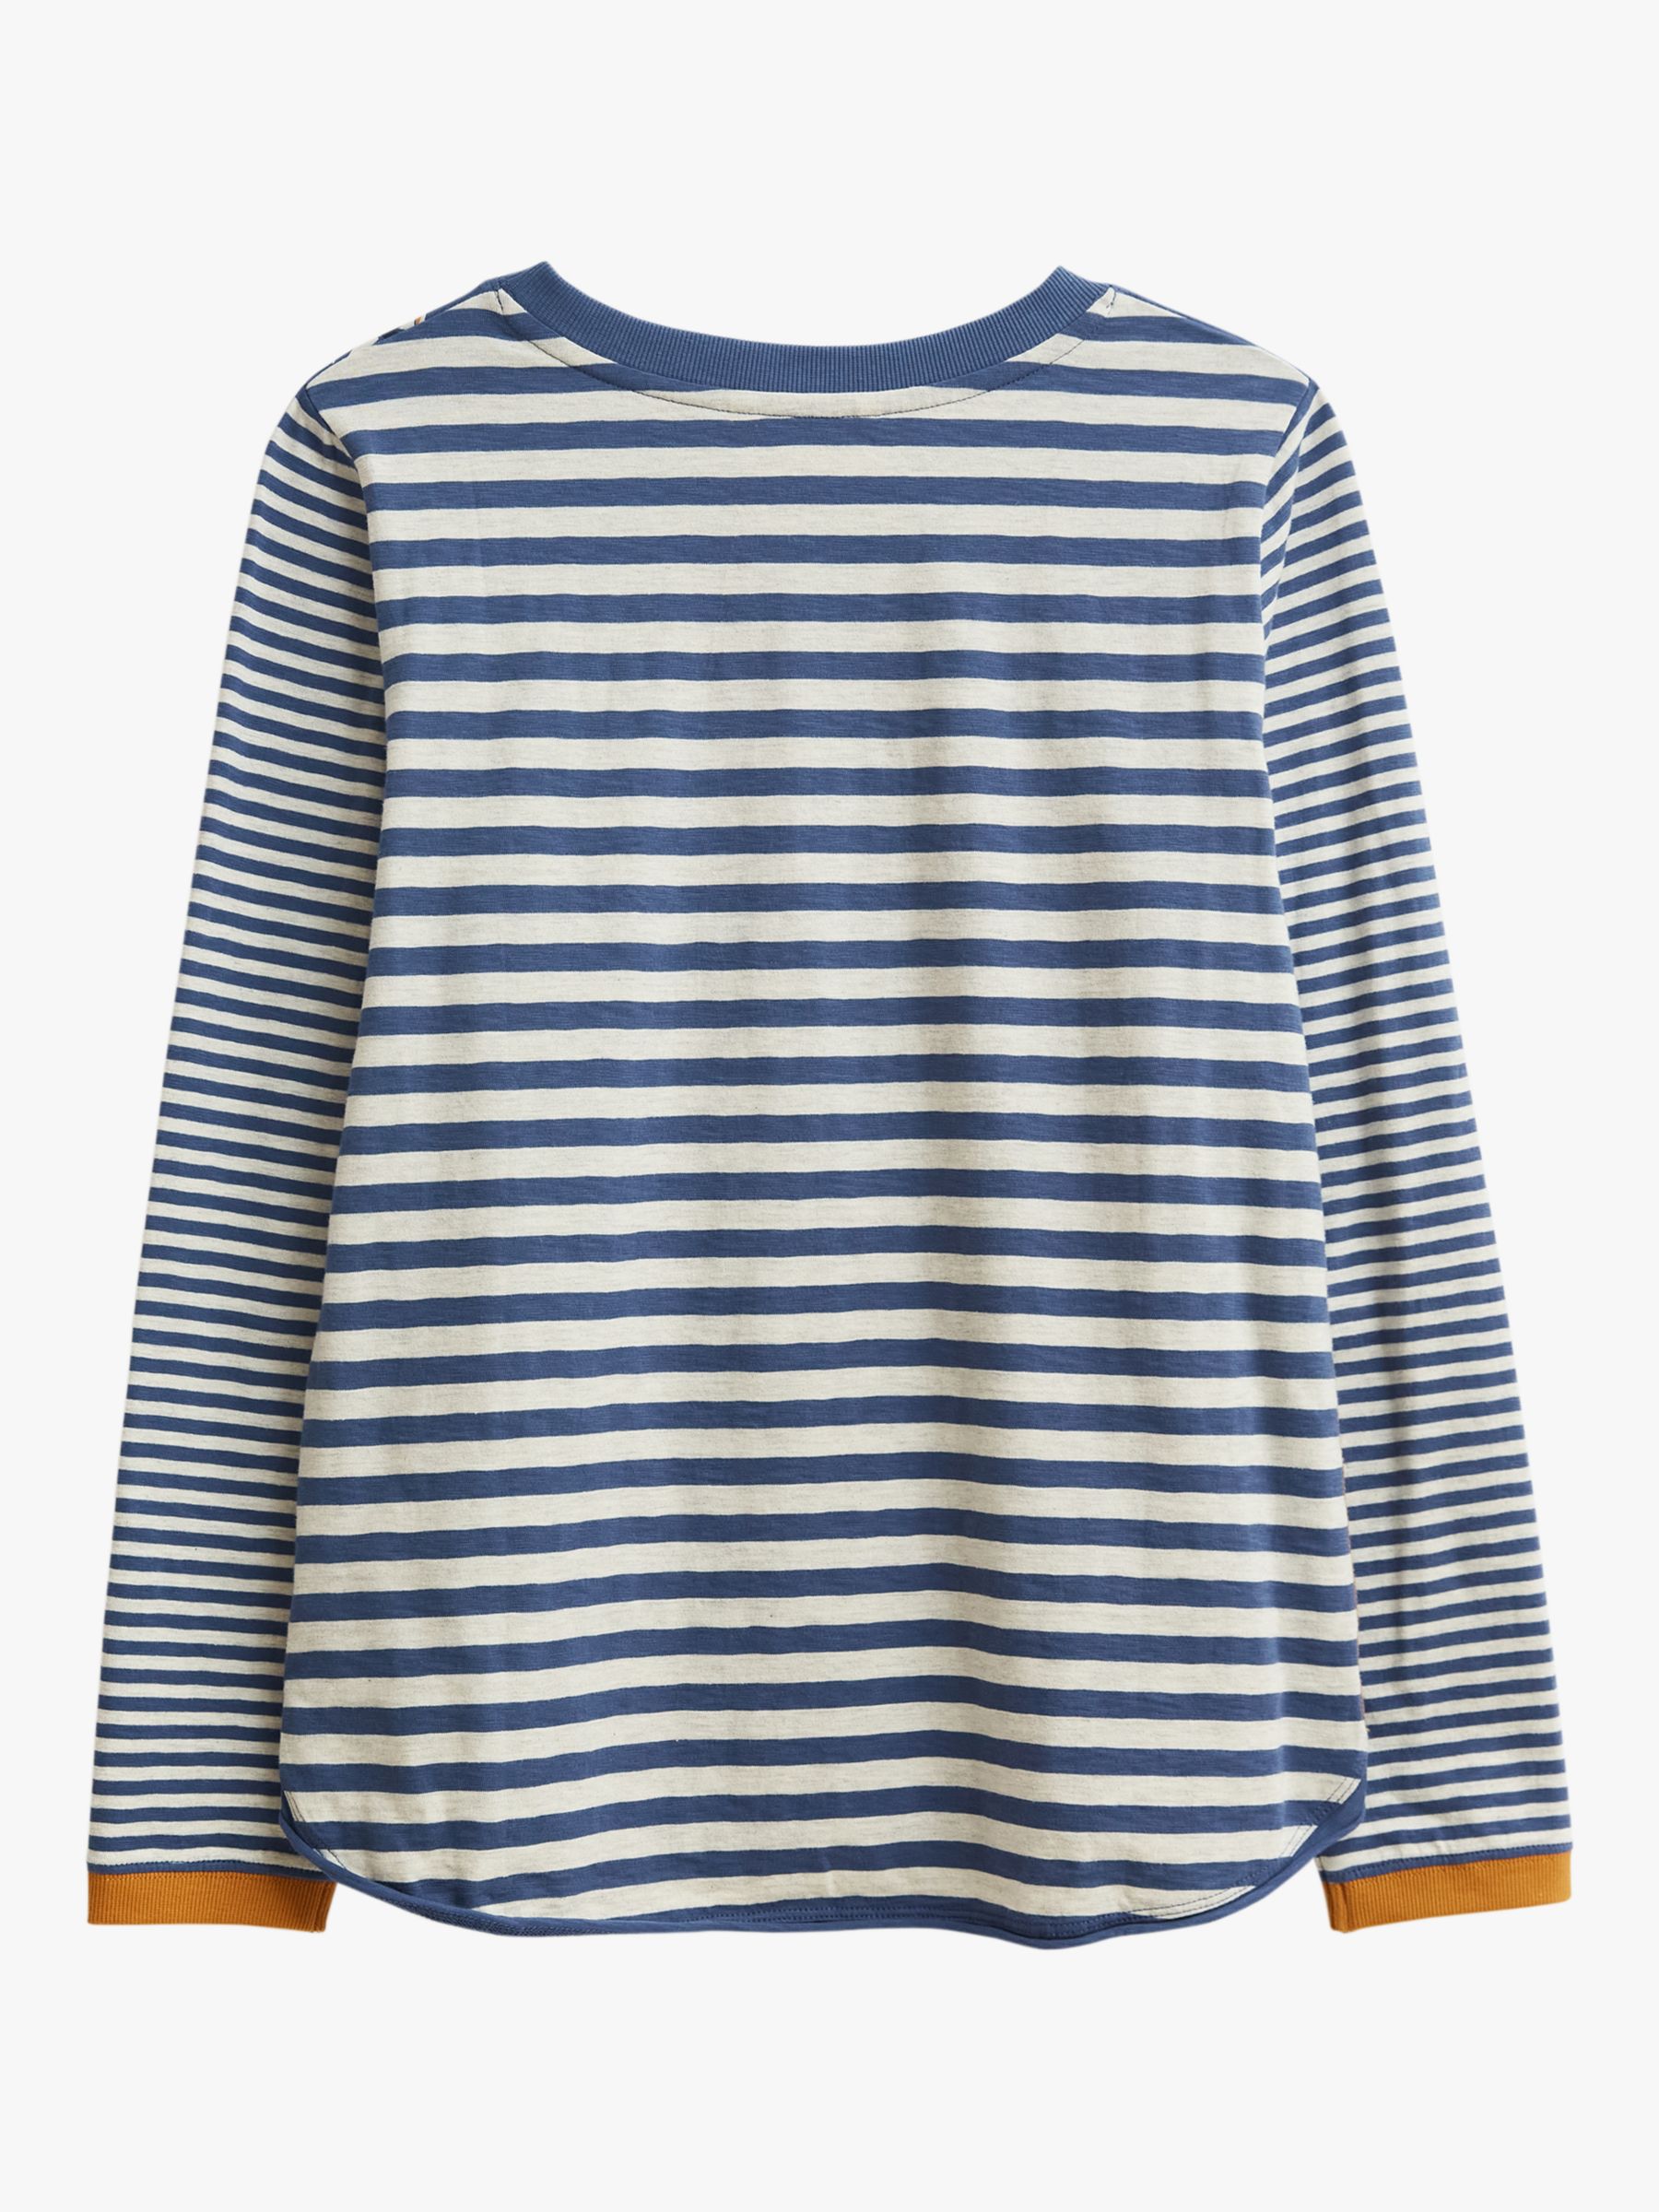 White Stuff Cassie Stripe and Leaves Print Long Sleeve Cotton T-Shirt ...